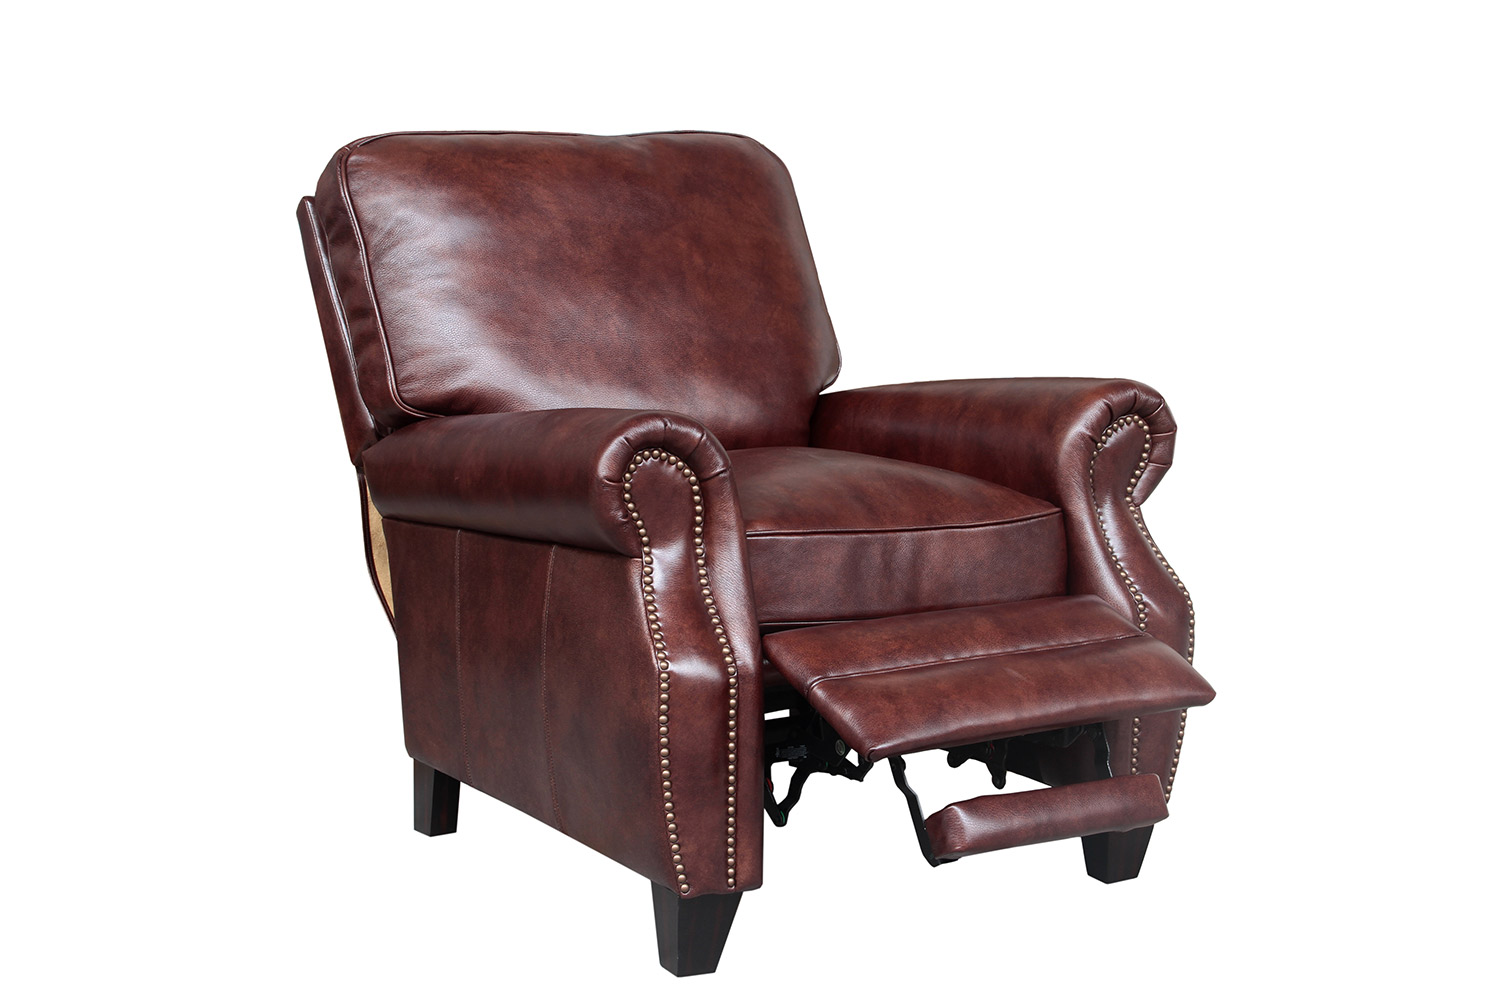 Barcalounger Briarwood Recliner Chair - Wenlock Fudge/All Leather